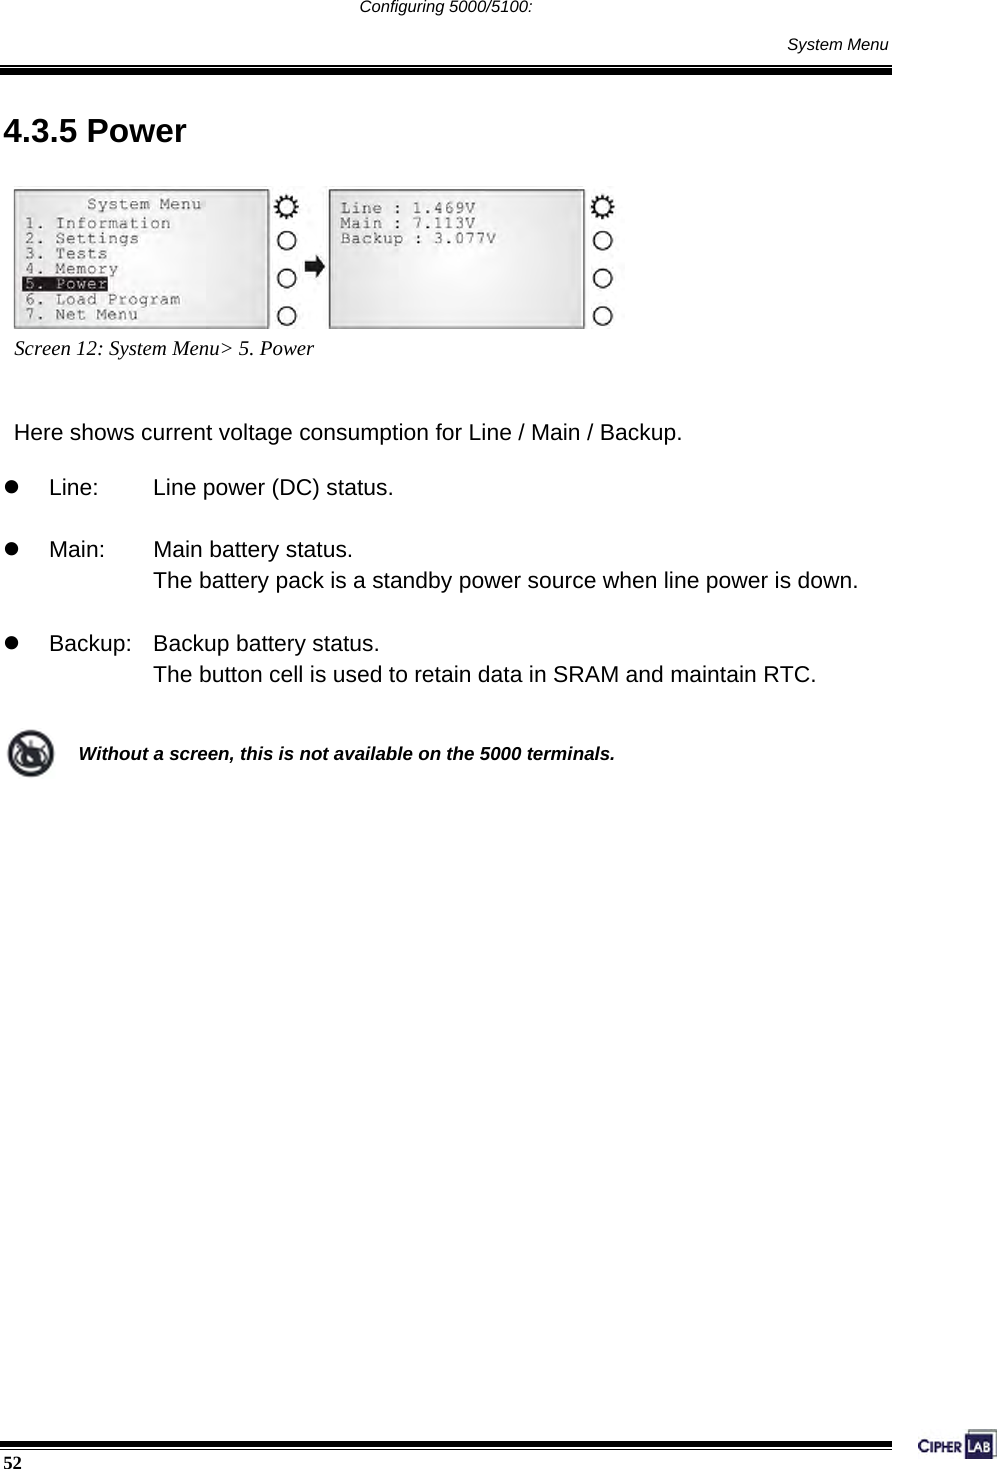  52                                                                                     Configuring 5000/5100:     System Menu 4.3.5 Power  Screen 12: System Menu&gt; 5. Power   Here shows current voltage consumption for Line / Main / Backup.  z  Line:    Line power (DC) status.  z  Main:    Main battery status. The battery pack is a standby power source when line power is down.  z  Backup:    Backup battery status. The button cell is used to retain data in SRAM and maintain RTC.   Without a screen, this is not available on the 5000 terminals.                